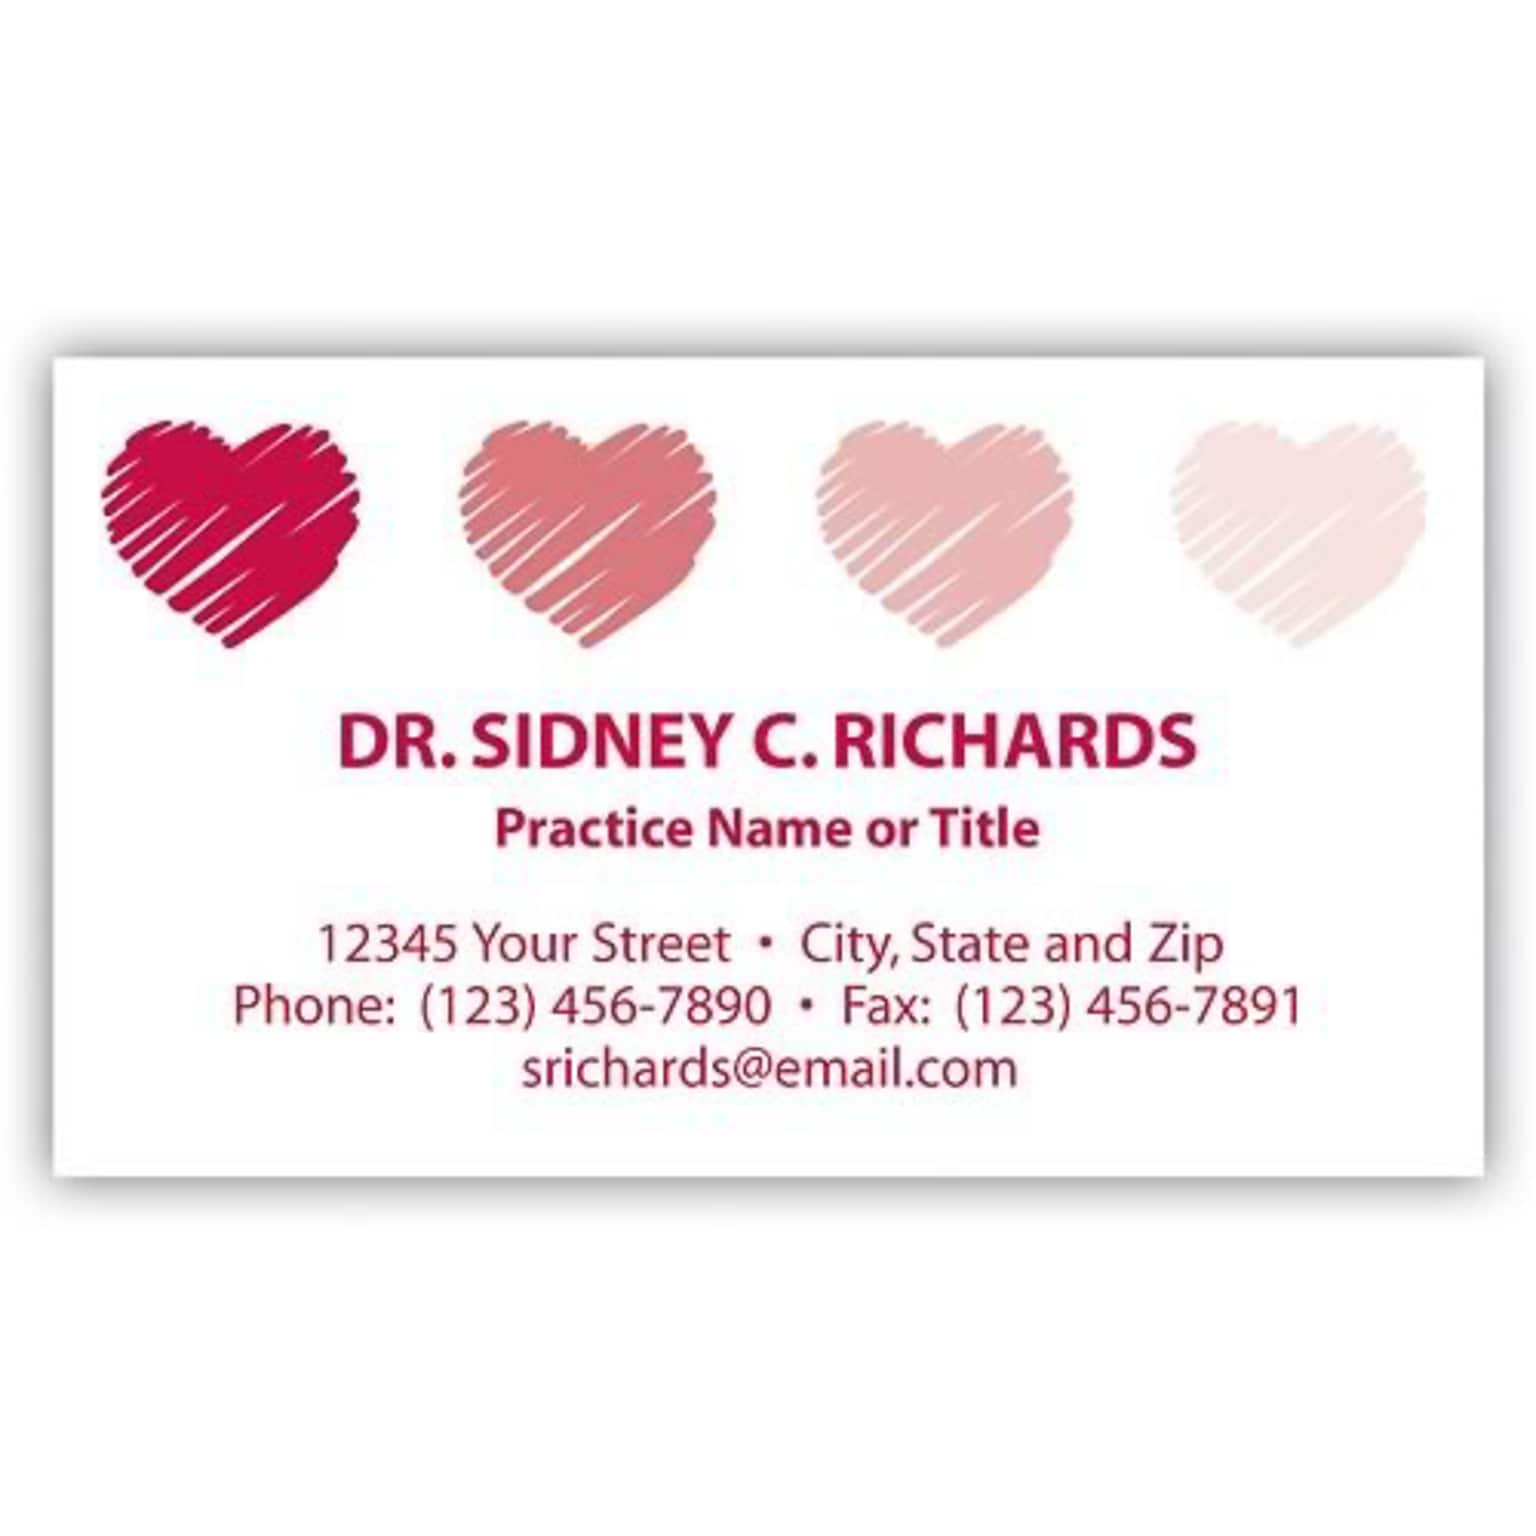 Custom 1-2 Color Business Cards, CLASSIC® Laid Solar White 80#, Raised Print, 1 Standard Ink, 2-Sided, 250/PK